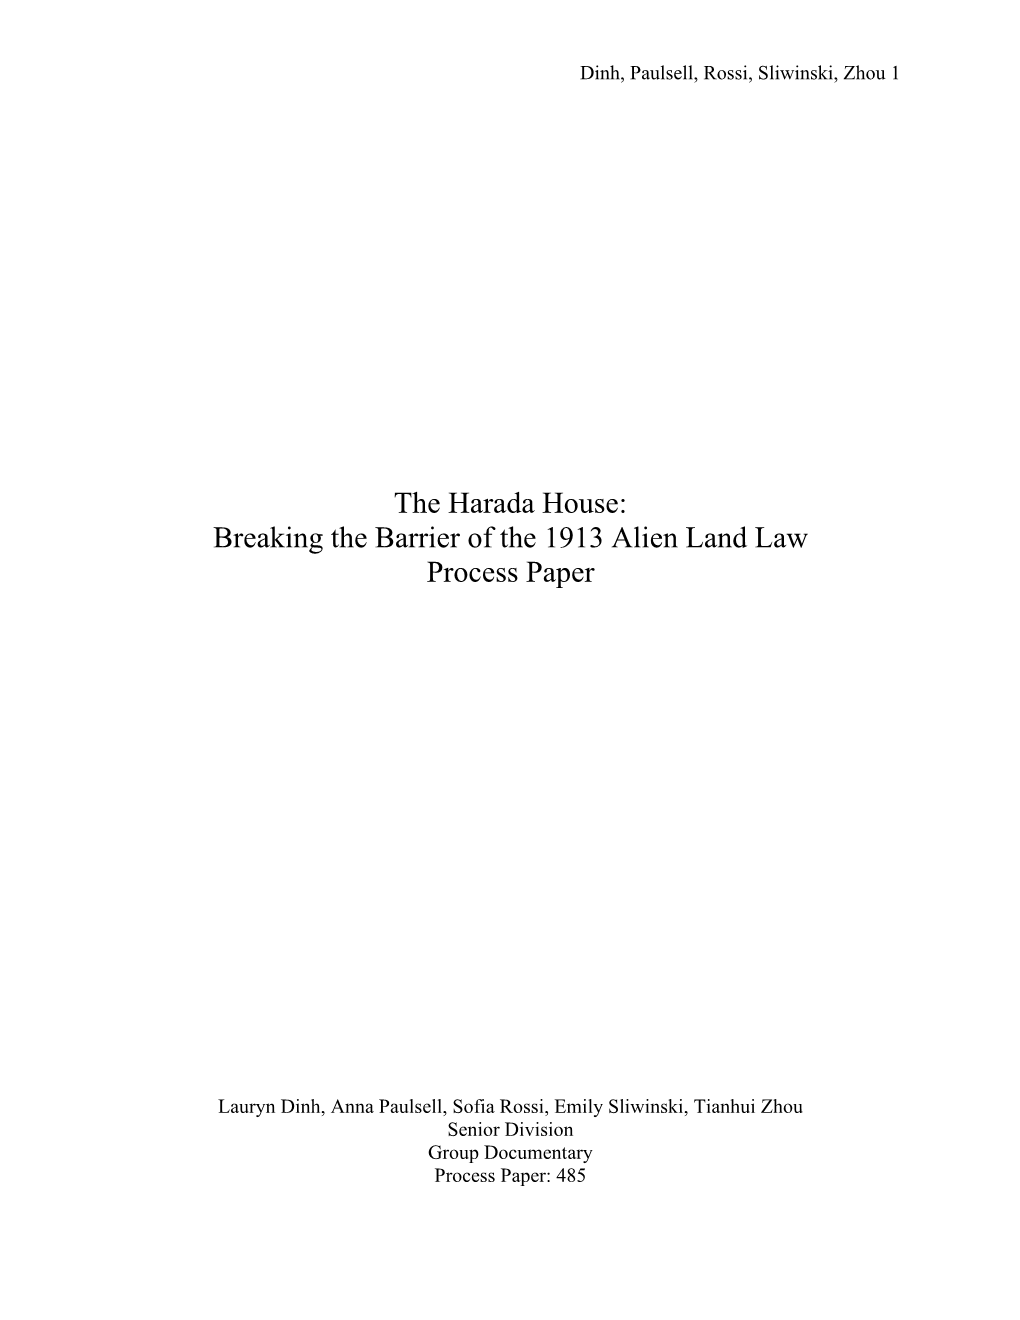 The Harada House: Breaking the Barrier of the 1913 Alien Land Law Process Paper